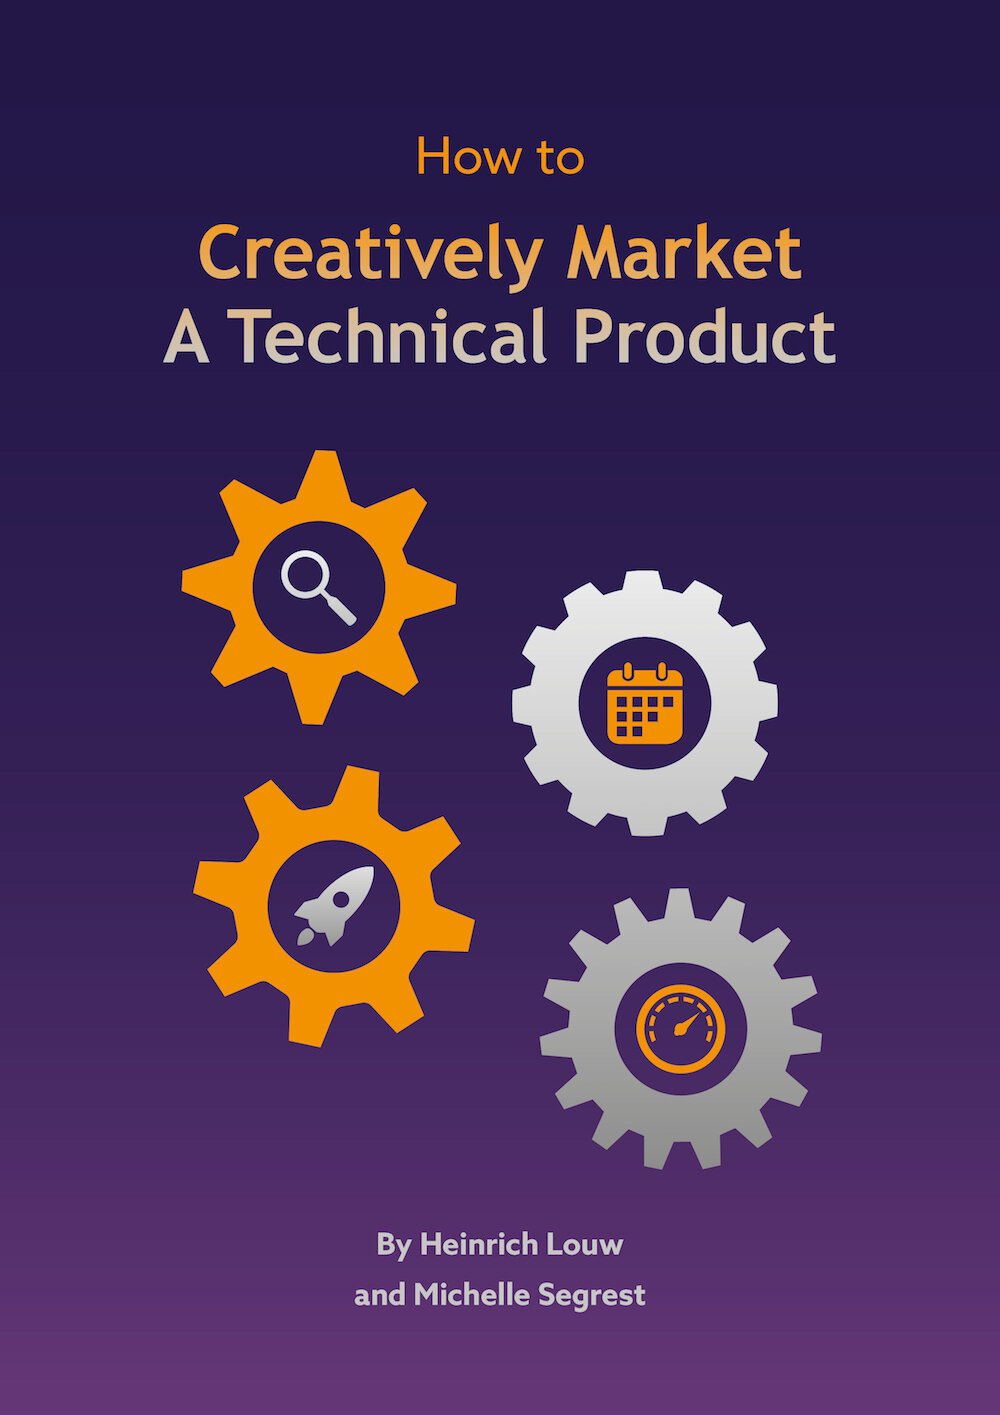 How to Creatively Market a Technical Product COVER lowres.jpg